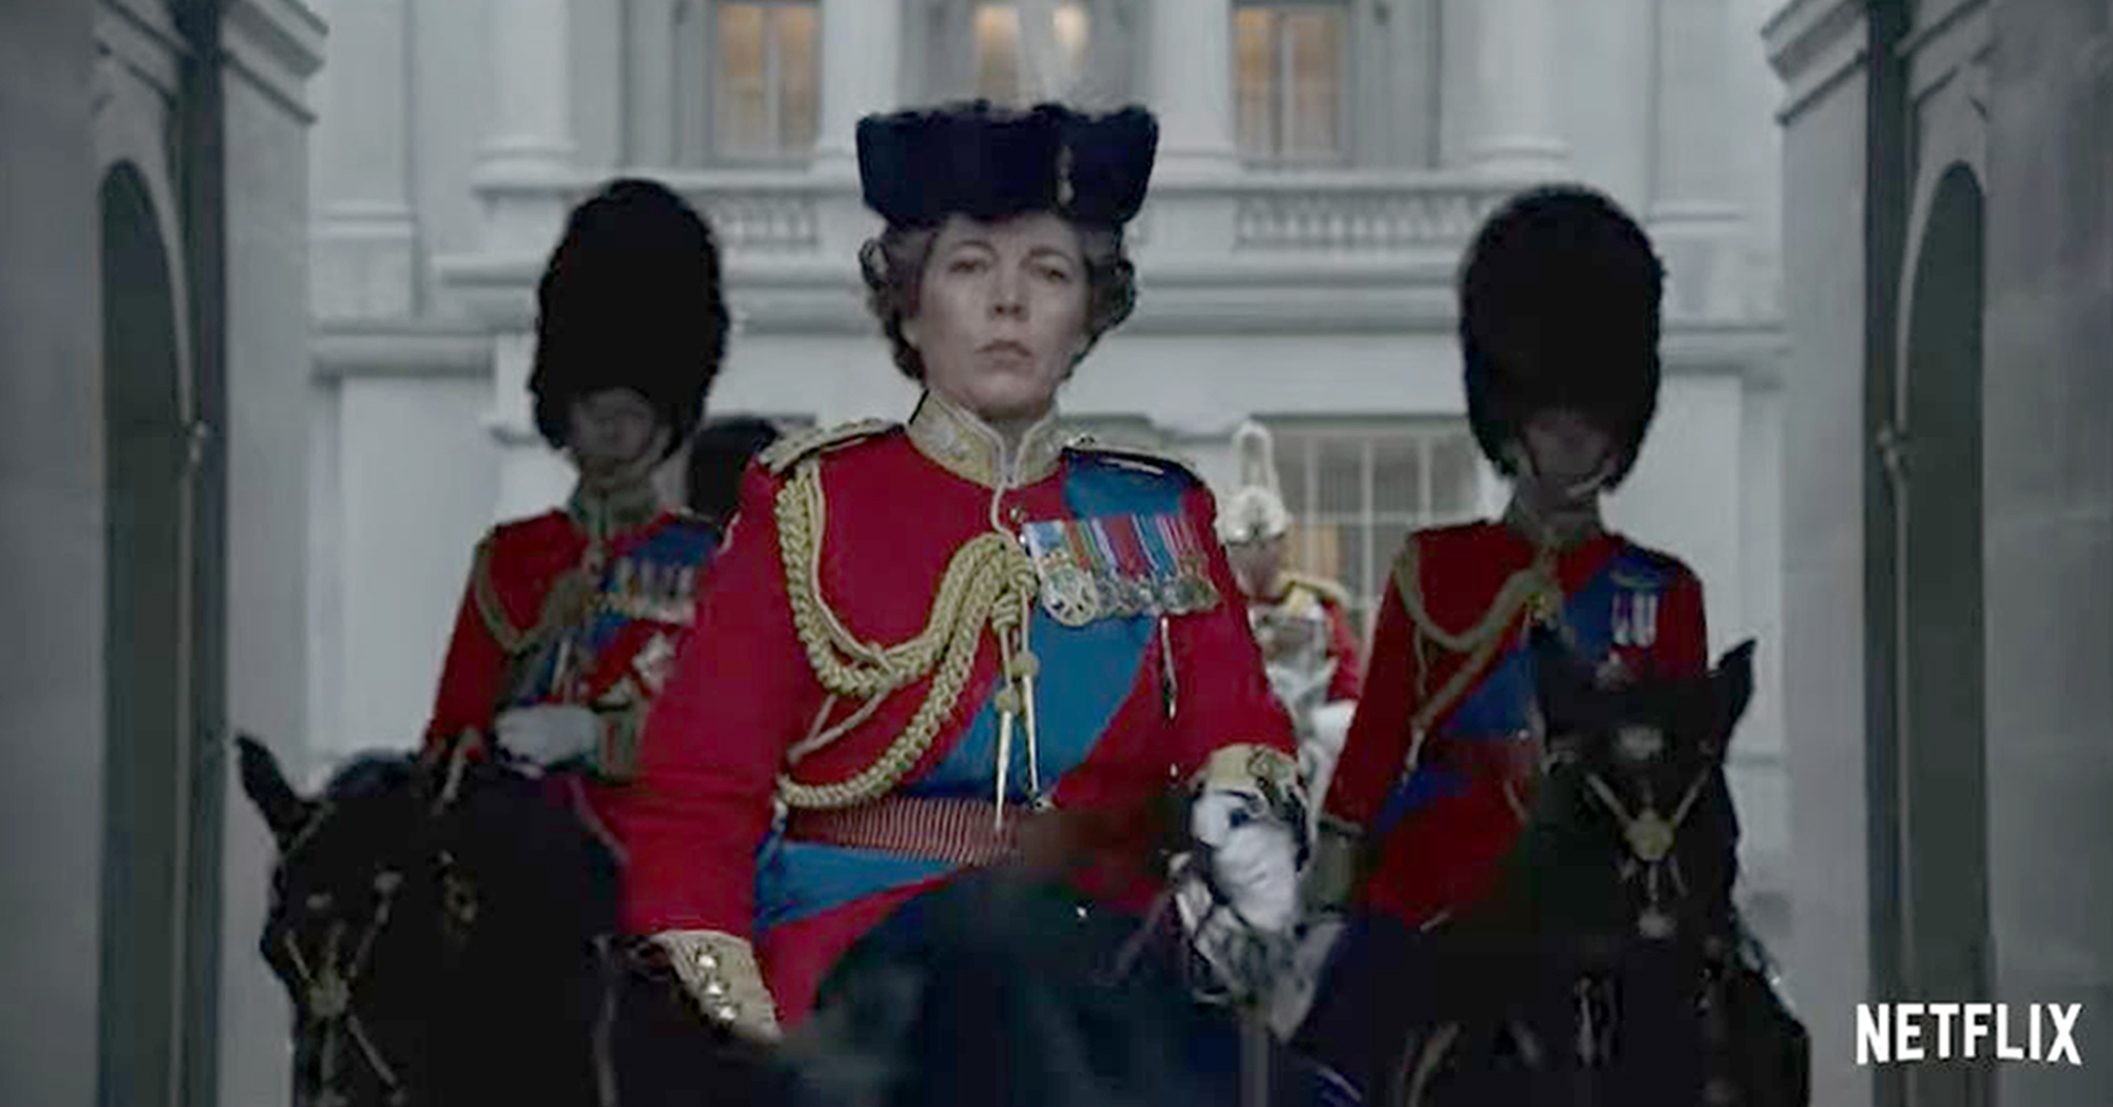 The Crowns Olivia Colman, pictured, played the role of Queen Elizabeth II. Credit: Netflix